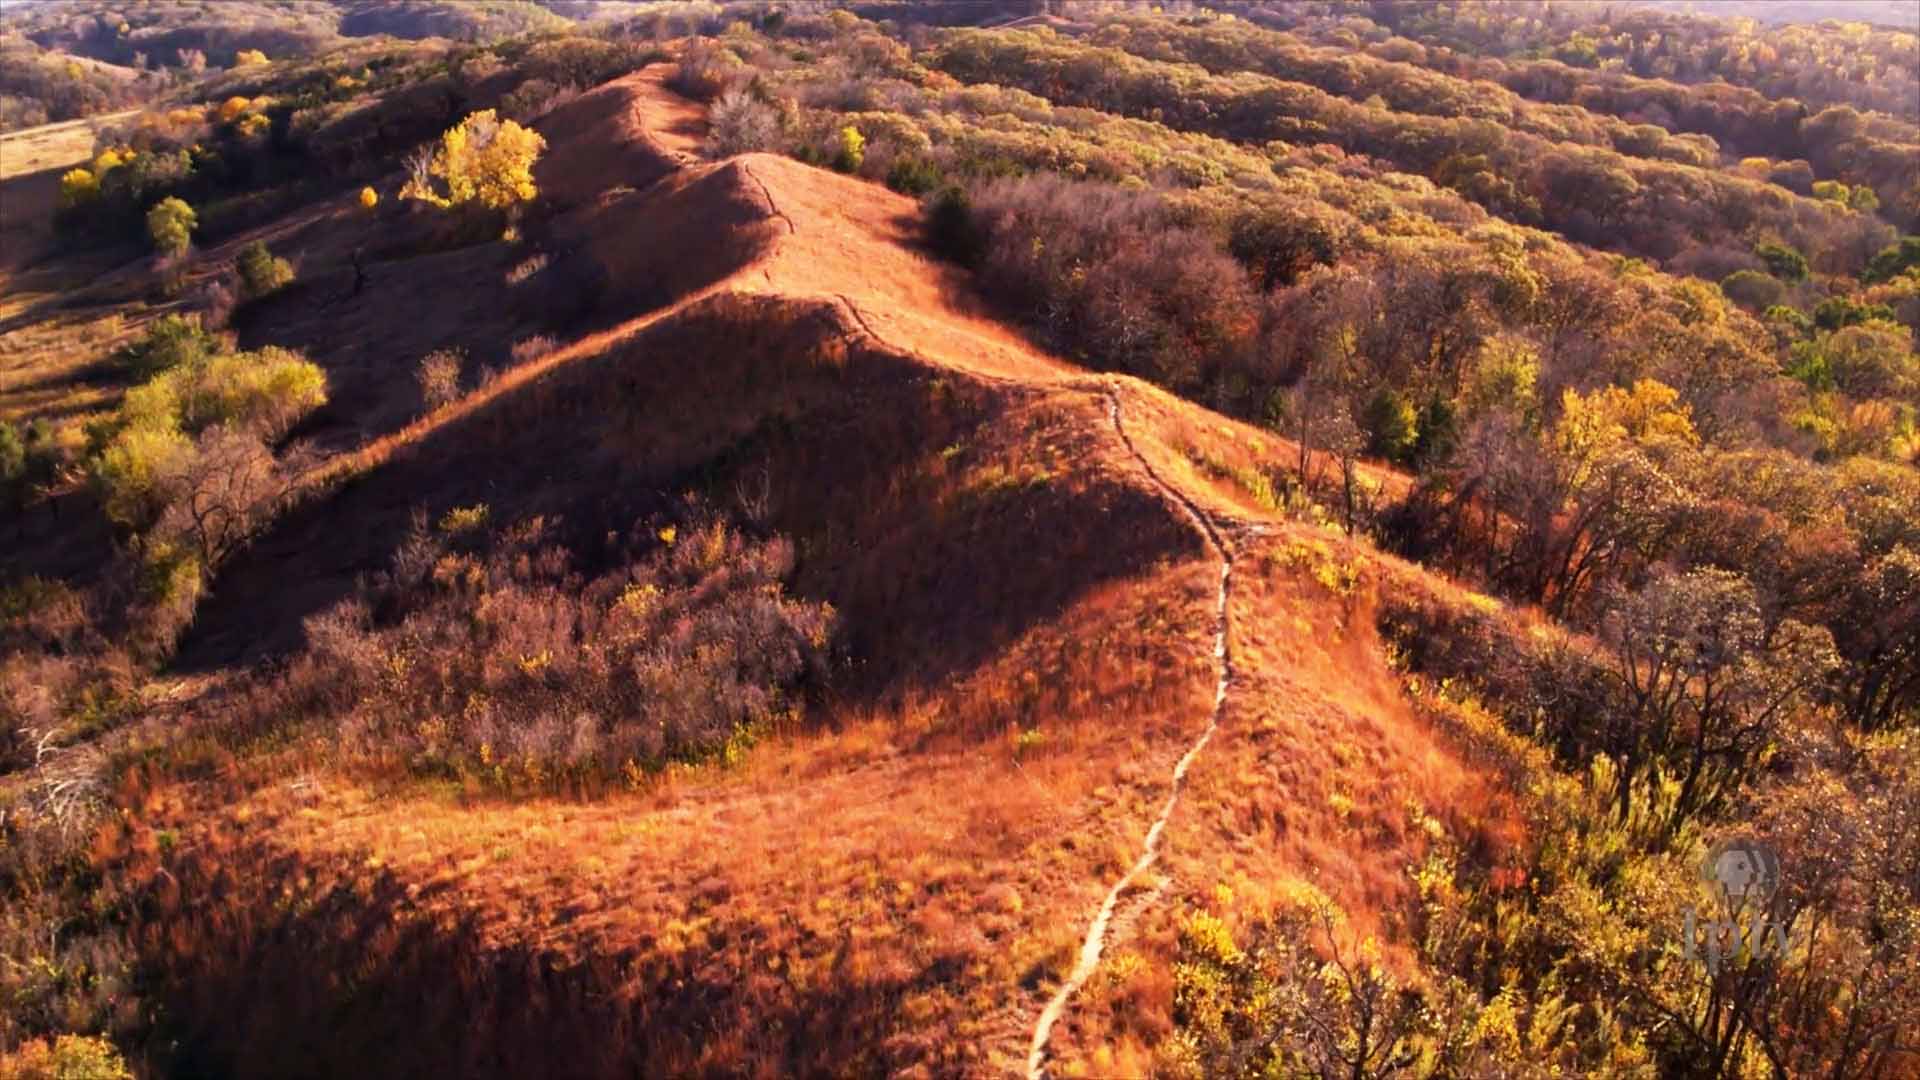 A path along the top of the Loess Hills on a bright, Fall day.